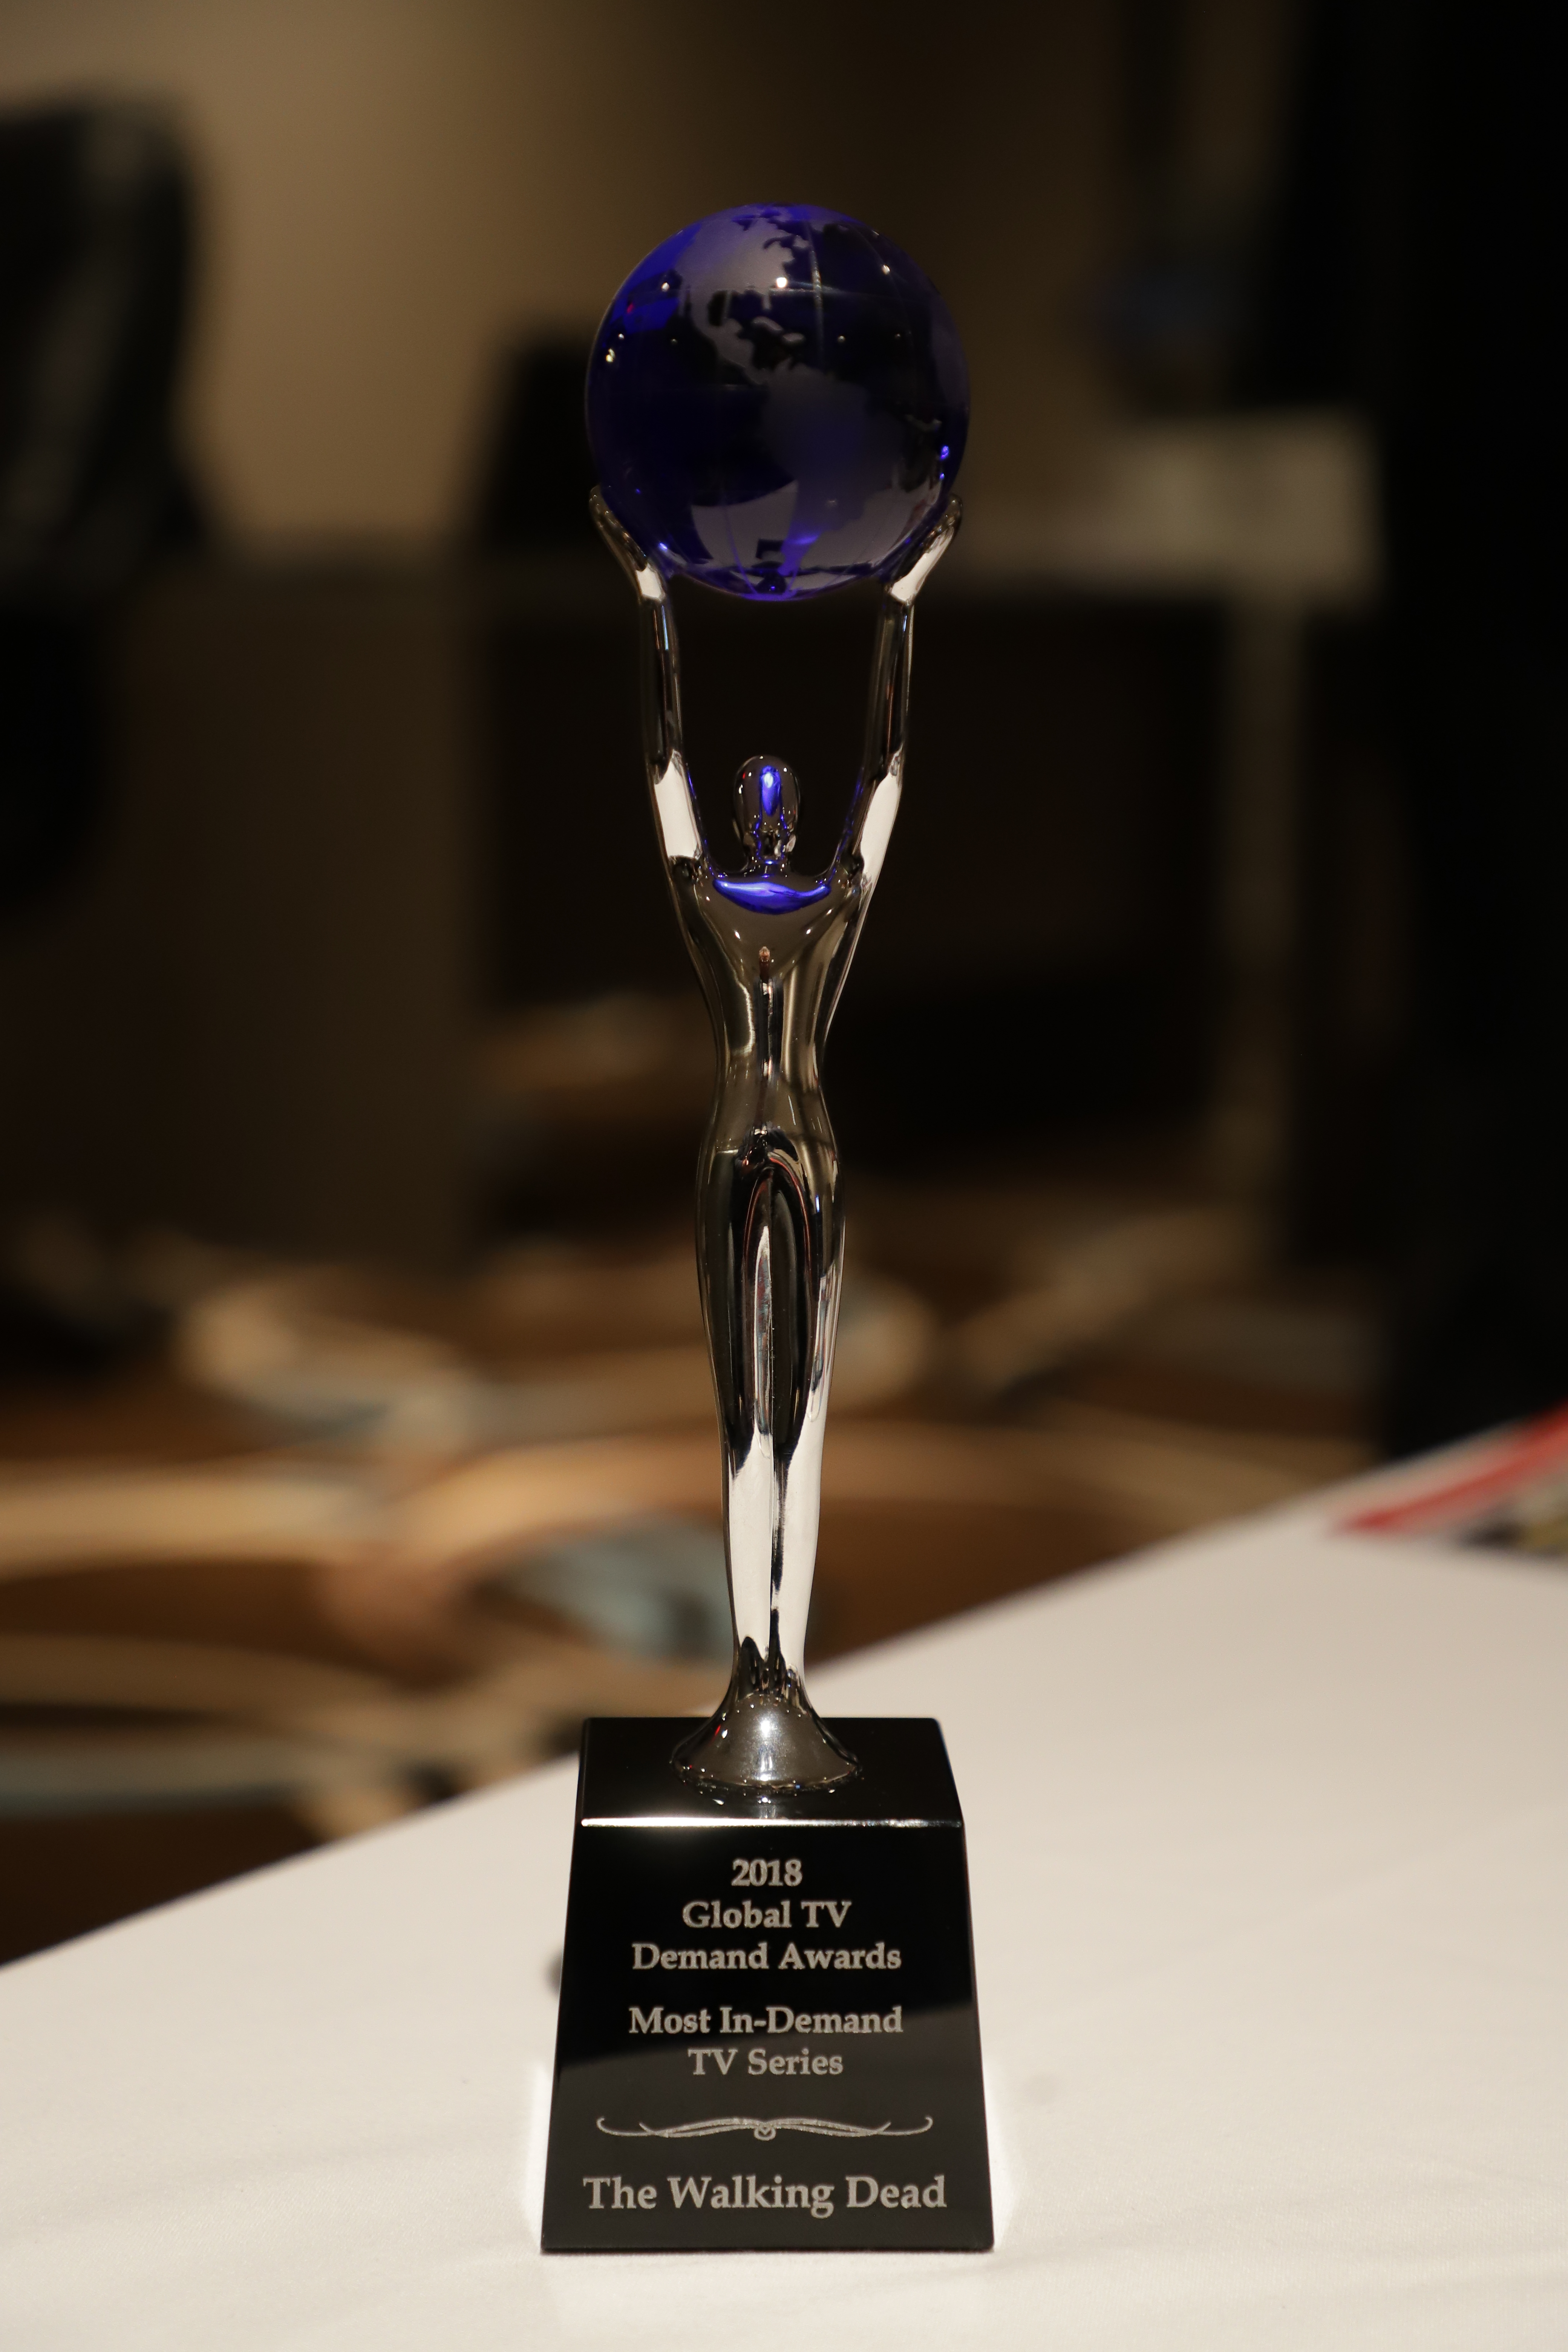 The trophy of the Global TV Demand Awards.